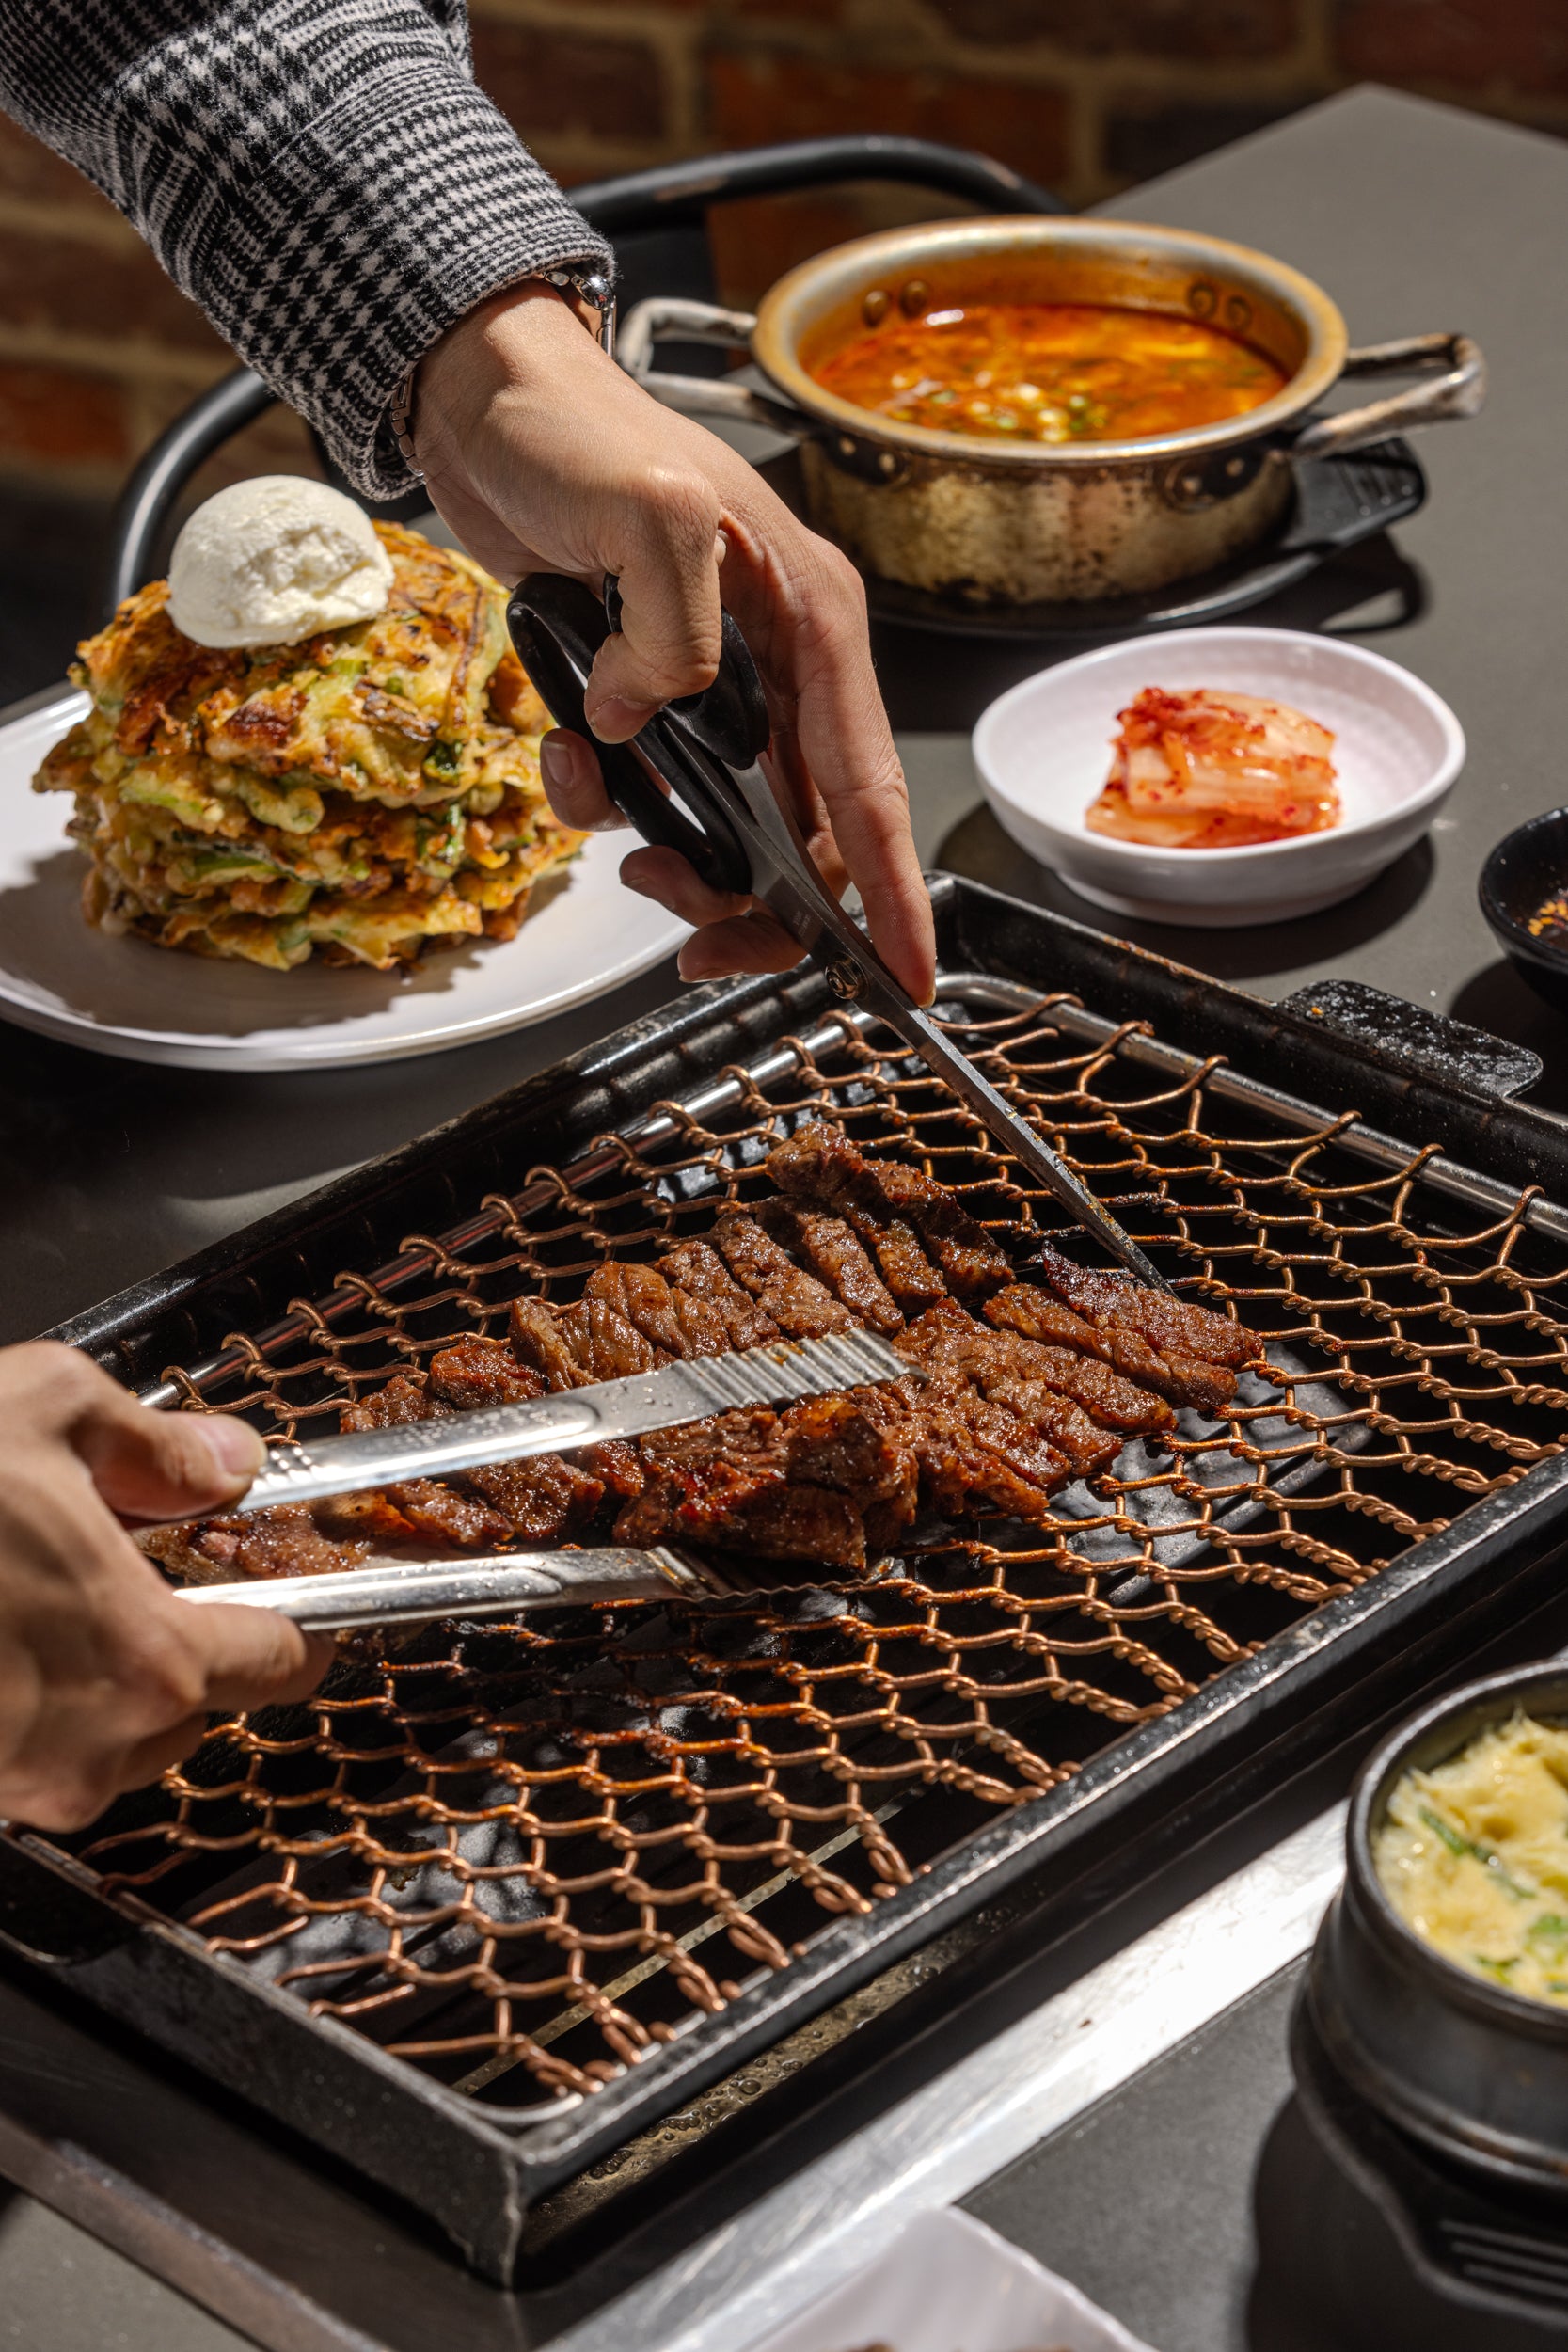 10 YEARS OF QUARTERS: A KBBQ BLOWOUT BRUNCH